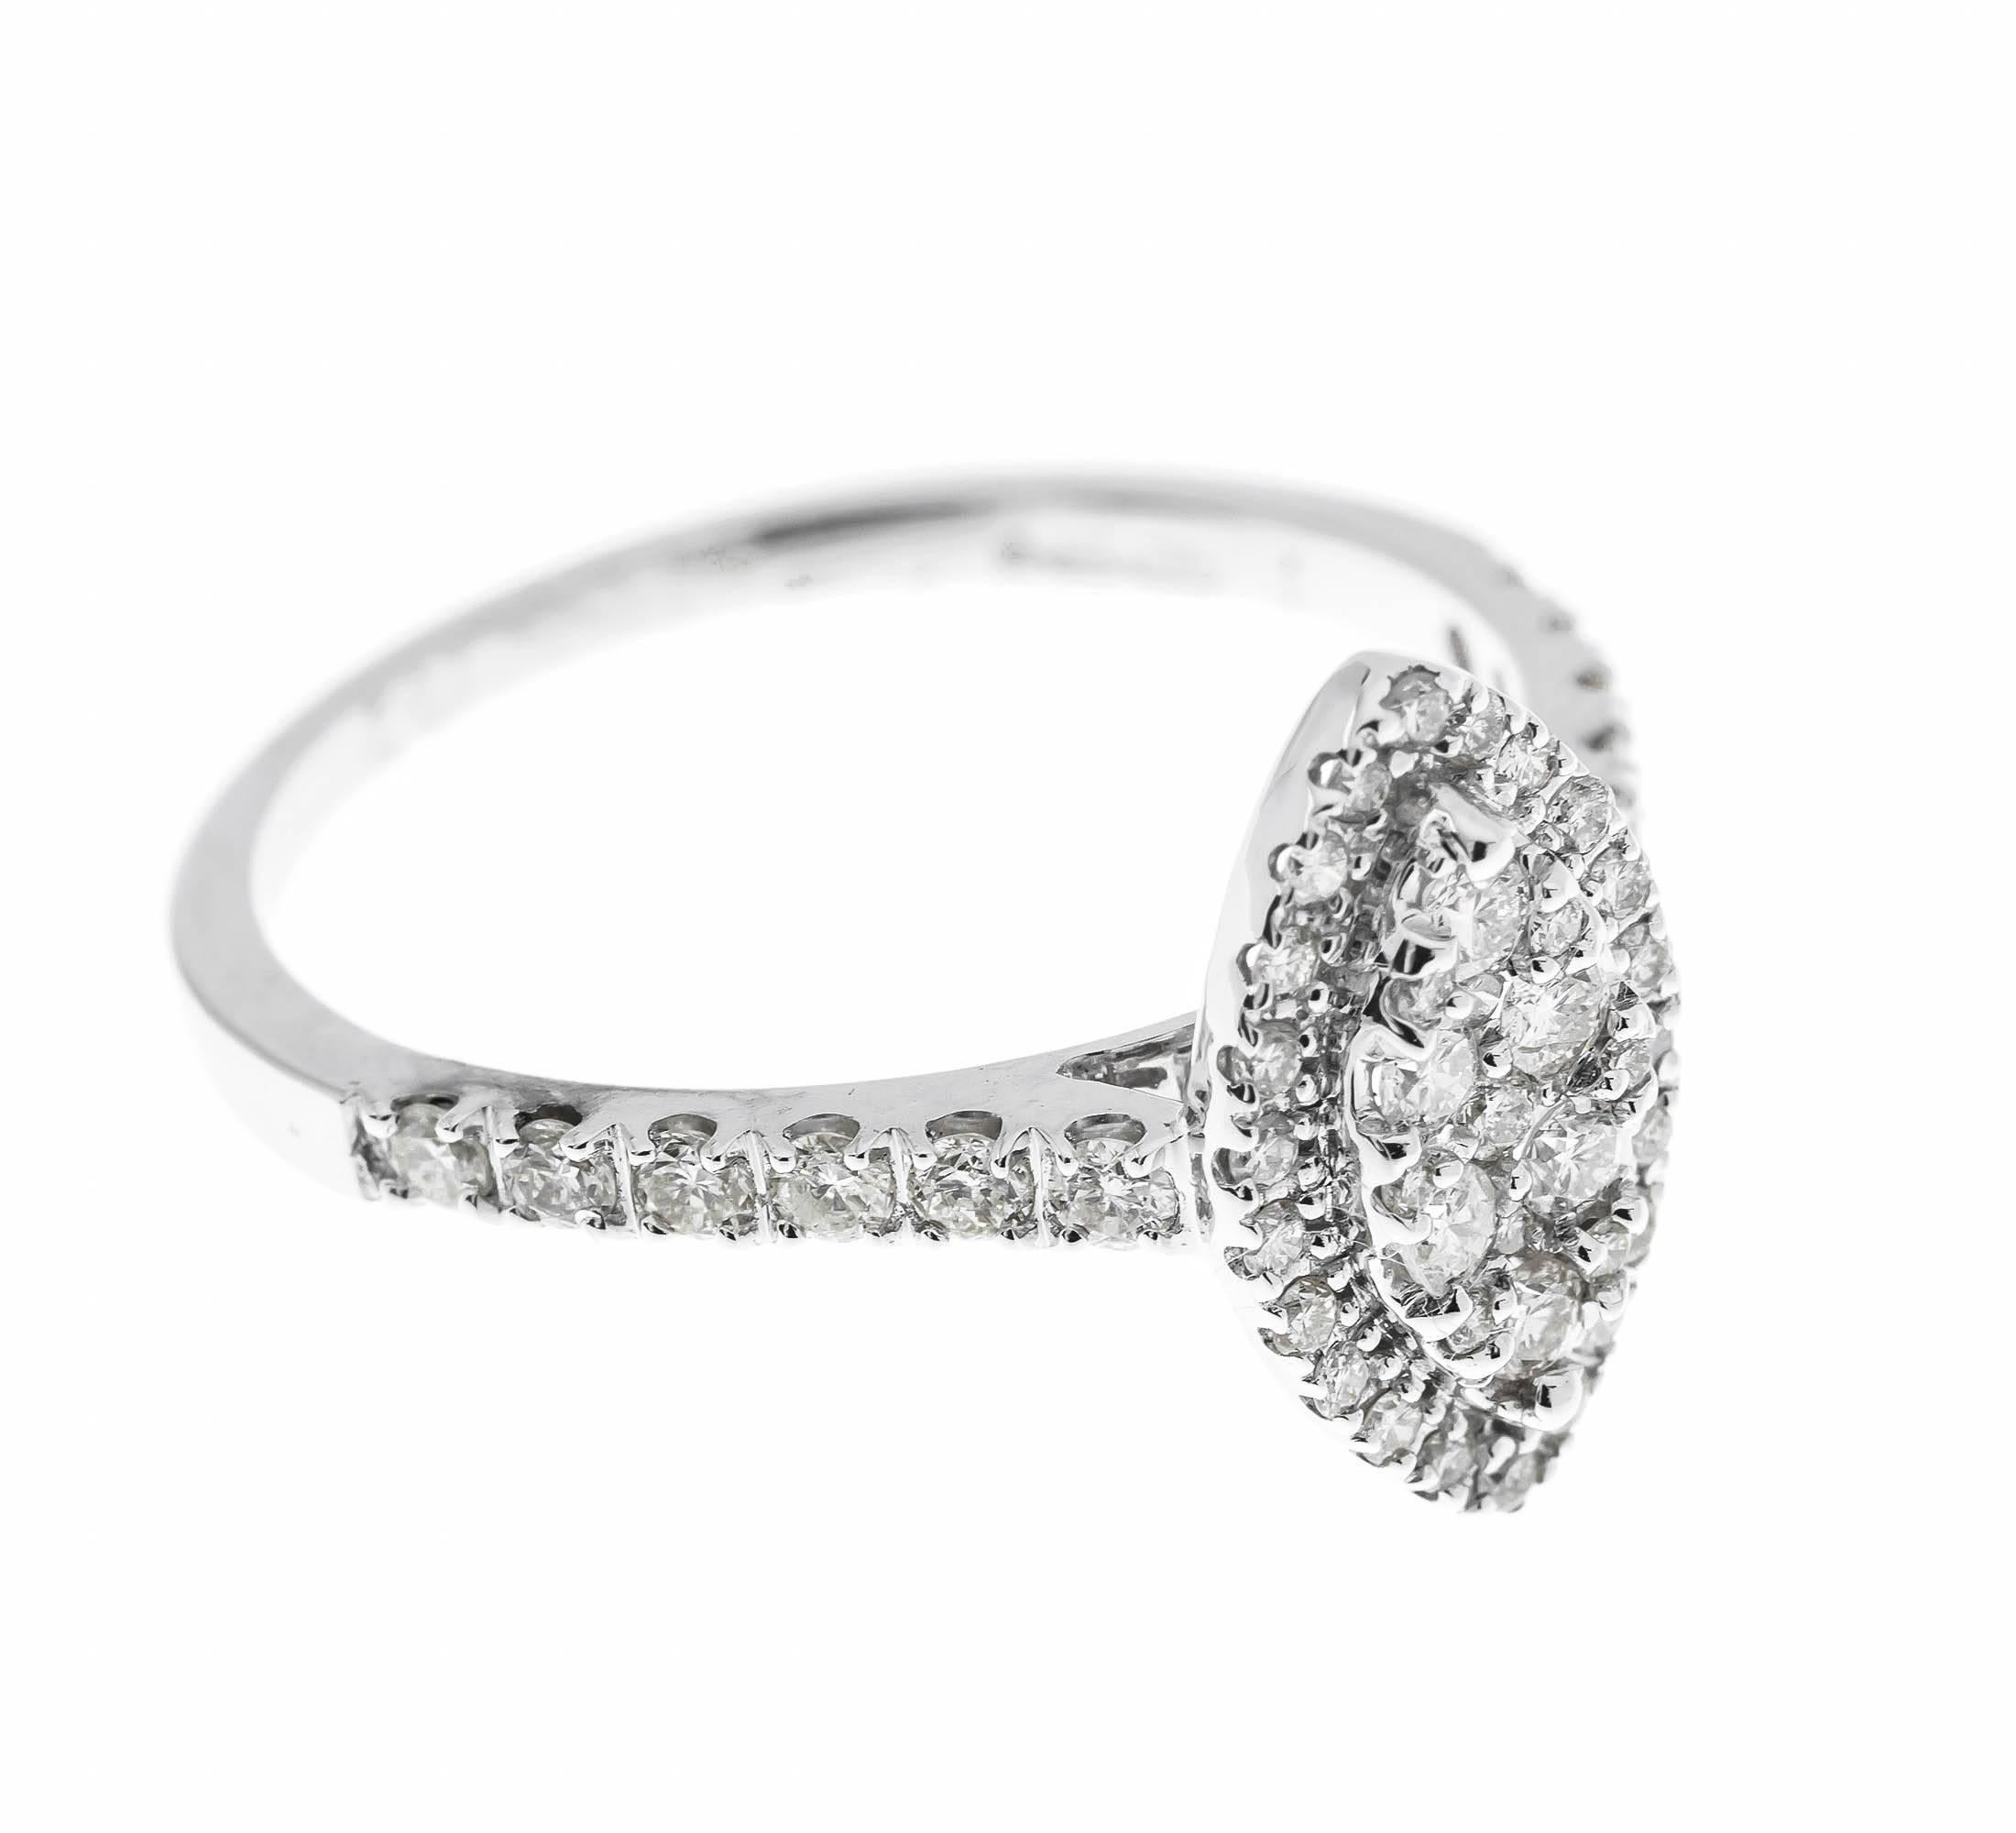 GEMMOLOGIST'S NOTES

This gorgeous ring, designed as a navette panel, encrusted with pave set twinkling diamonds. Designed to fit up flush against a wedding band or eternity ring of your choice.

A lovely piece, that catches the light beautifully